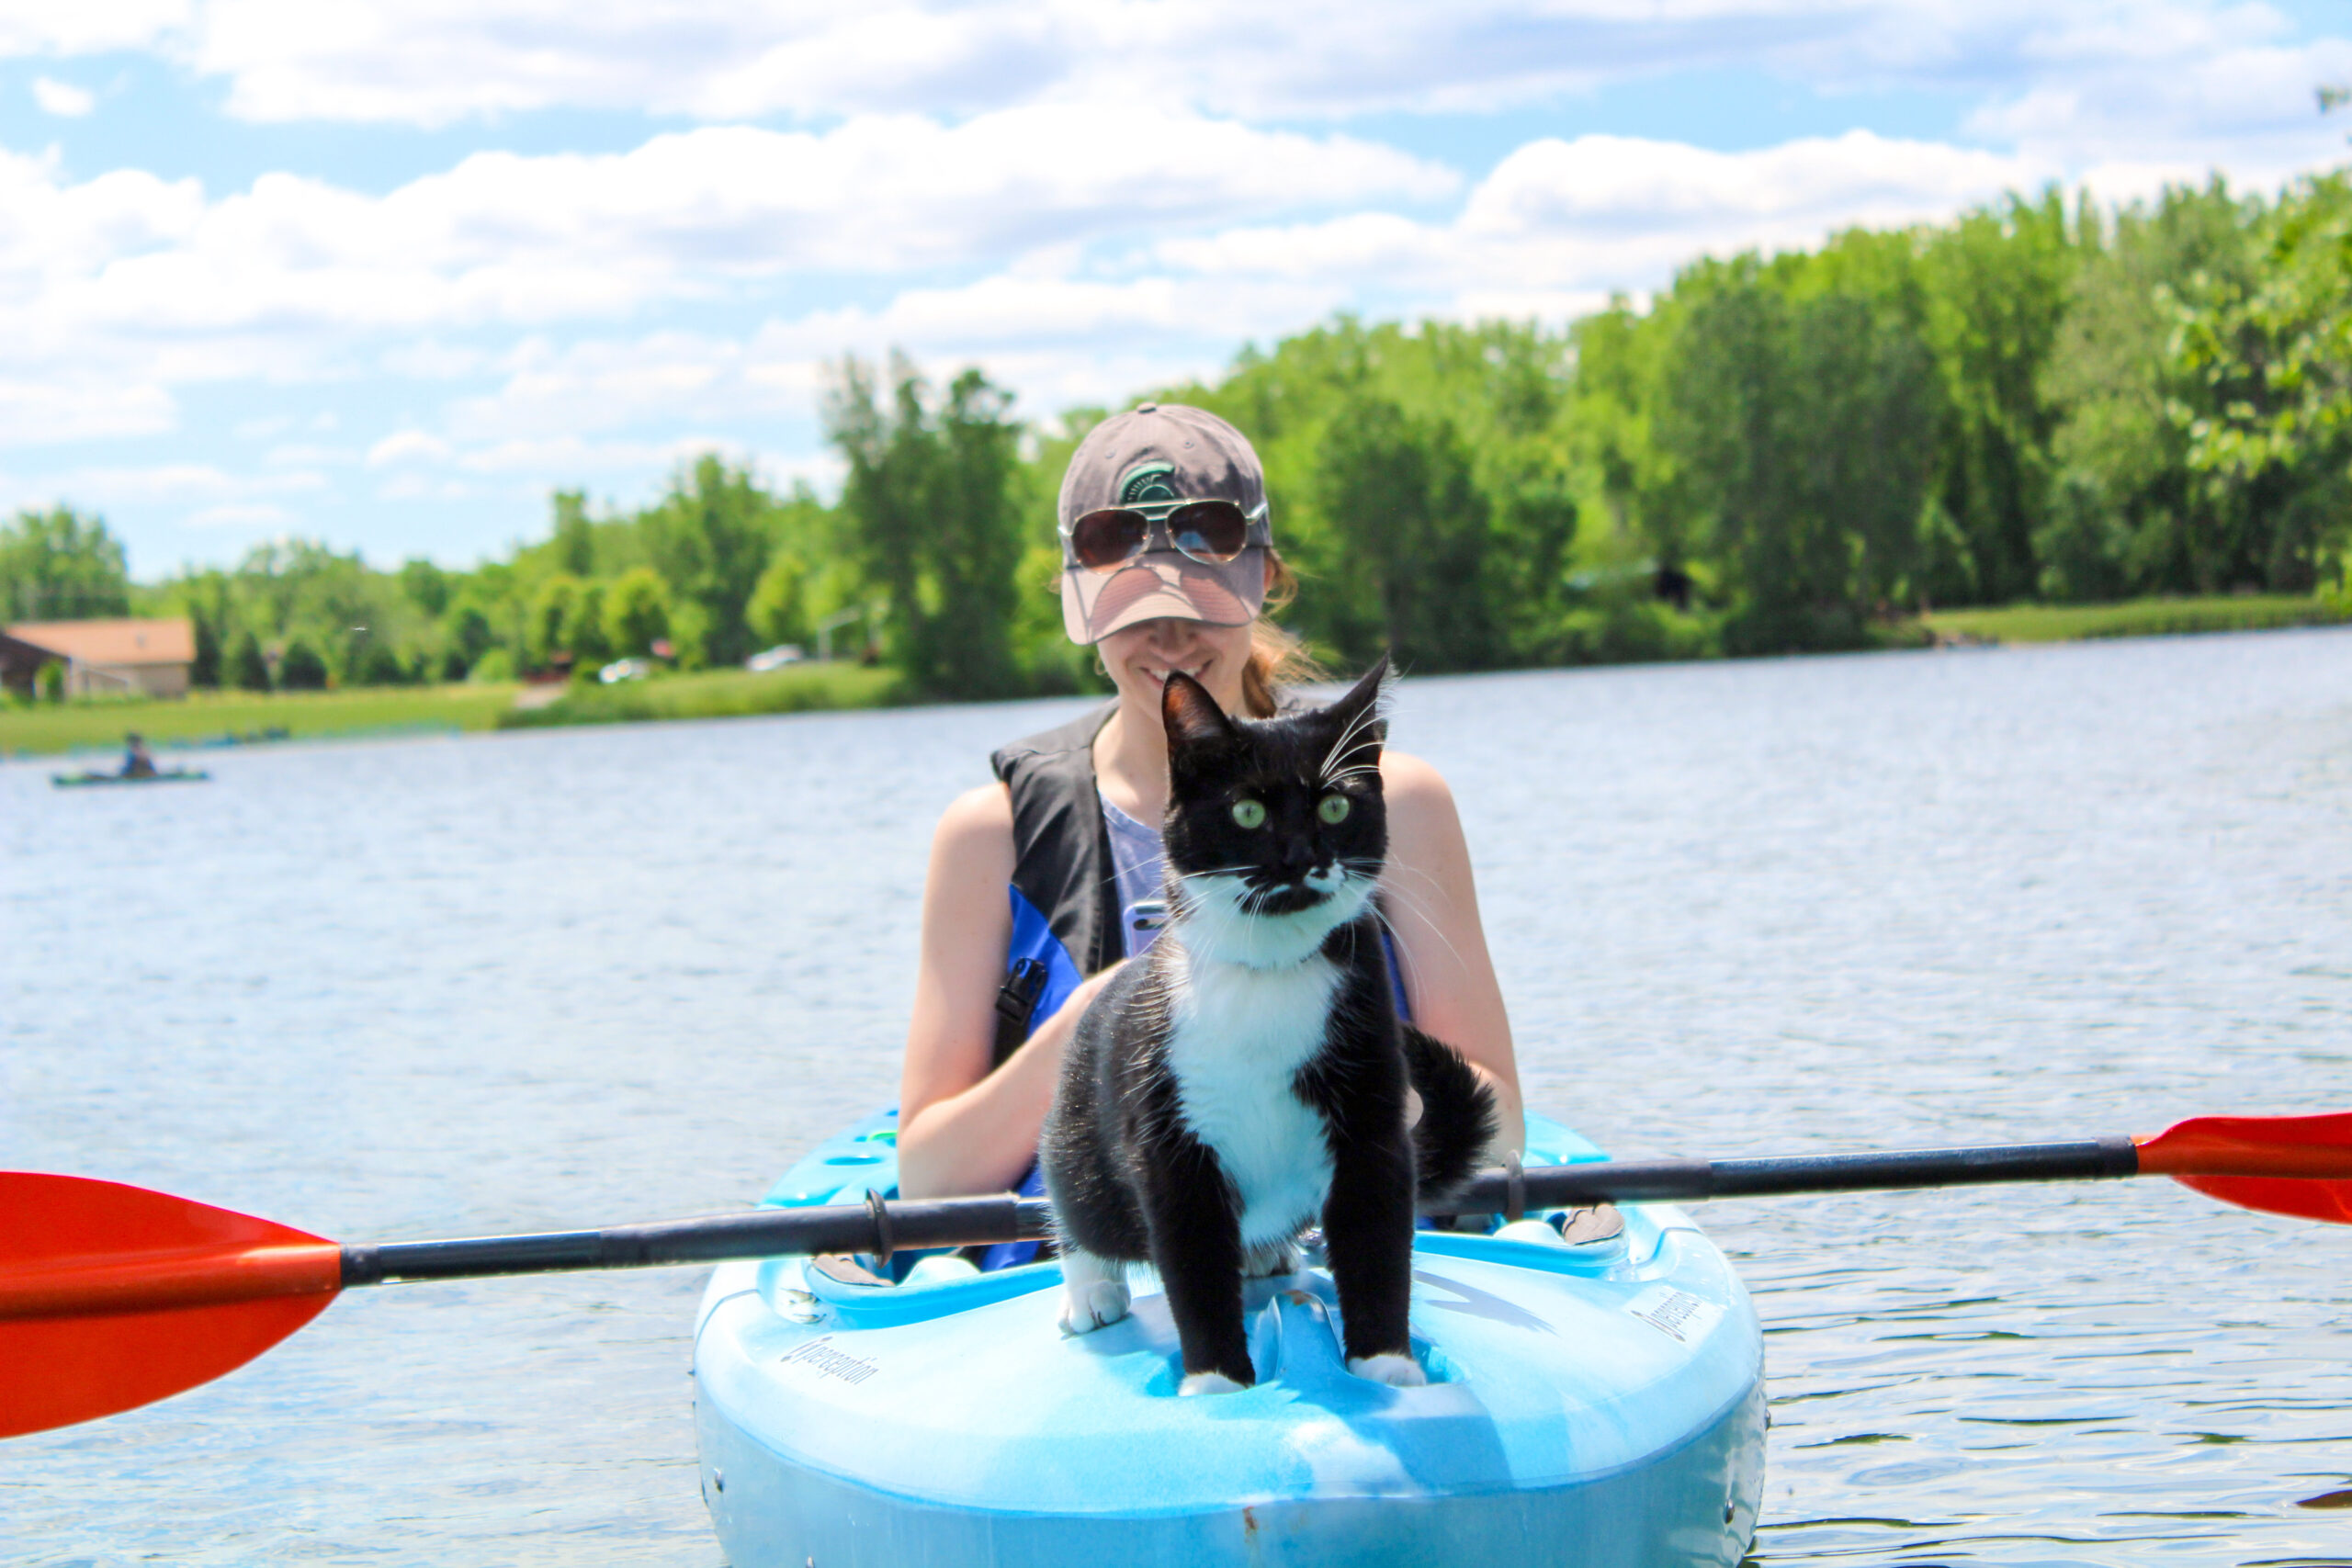 Kayaking with a cat